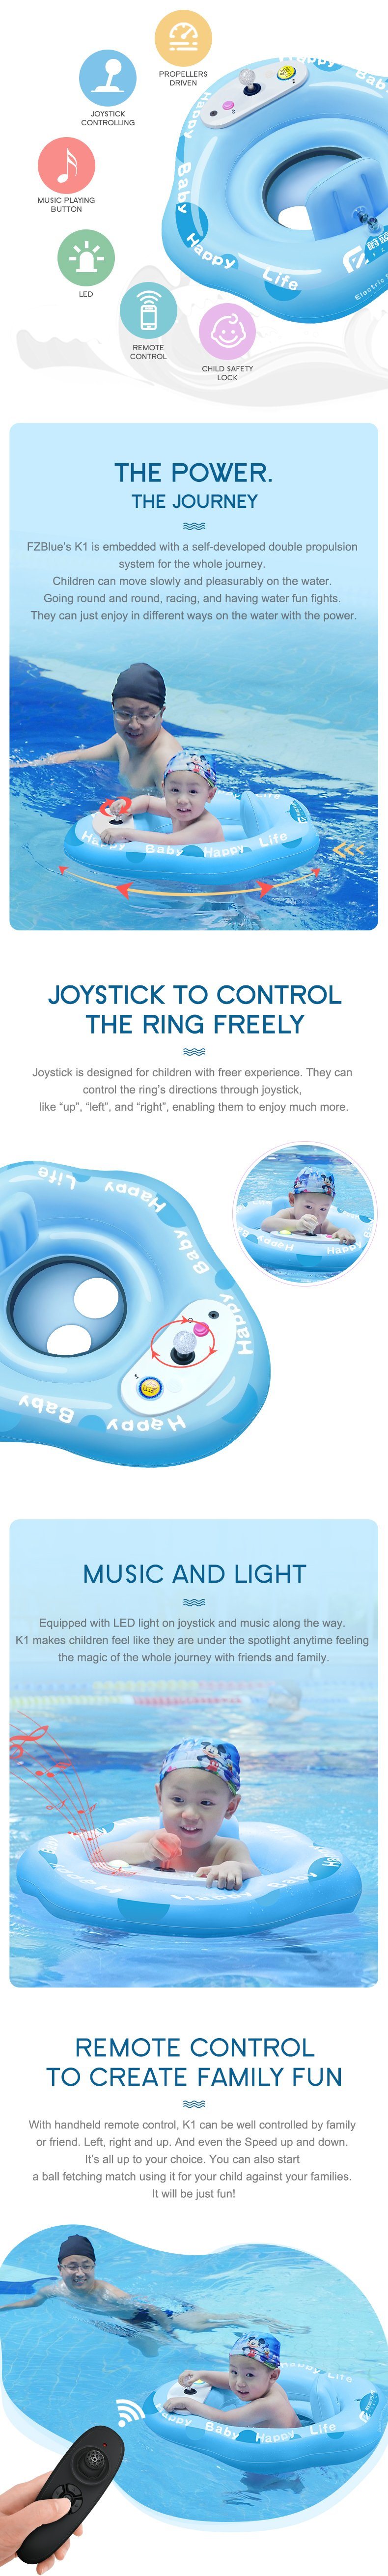 Smart Water Toy with Remote Control and Multiple Protections